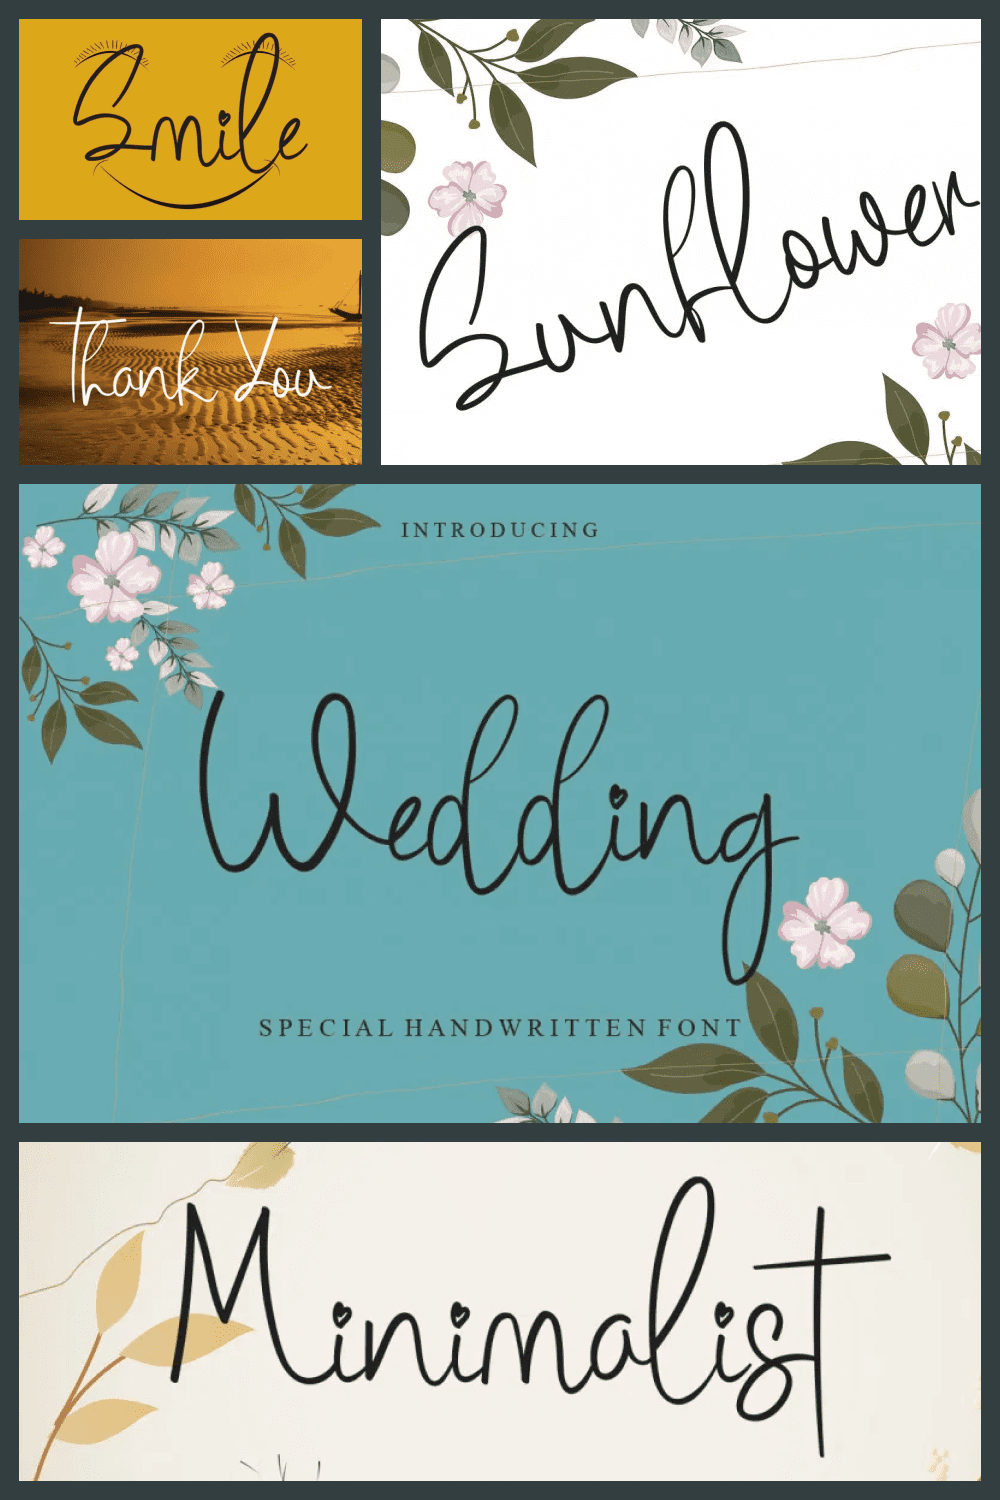 It’s an equally lovely and cursive handwritten font that’s great for delivering any message with authenticity and charm.